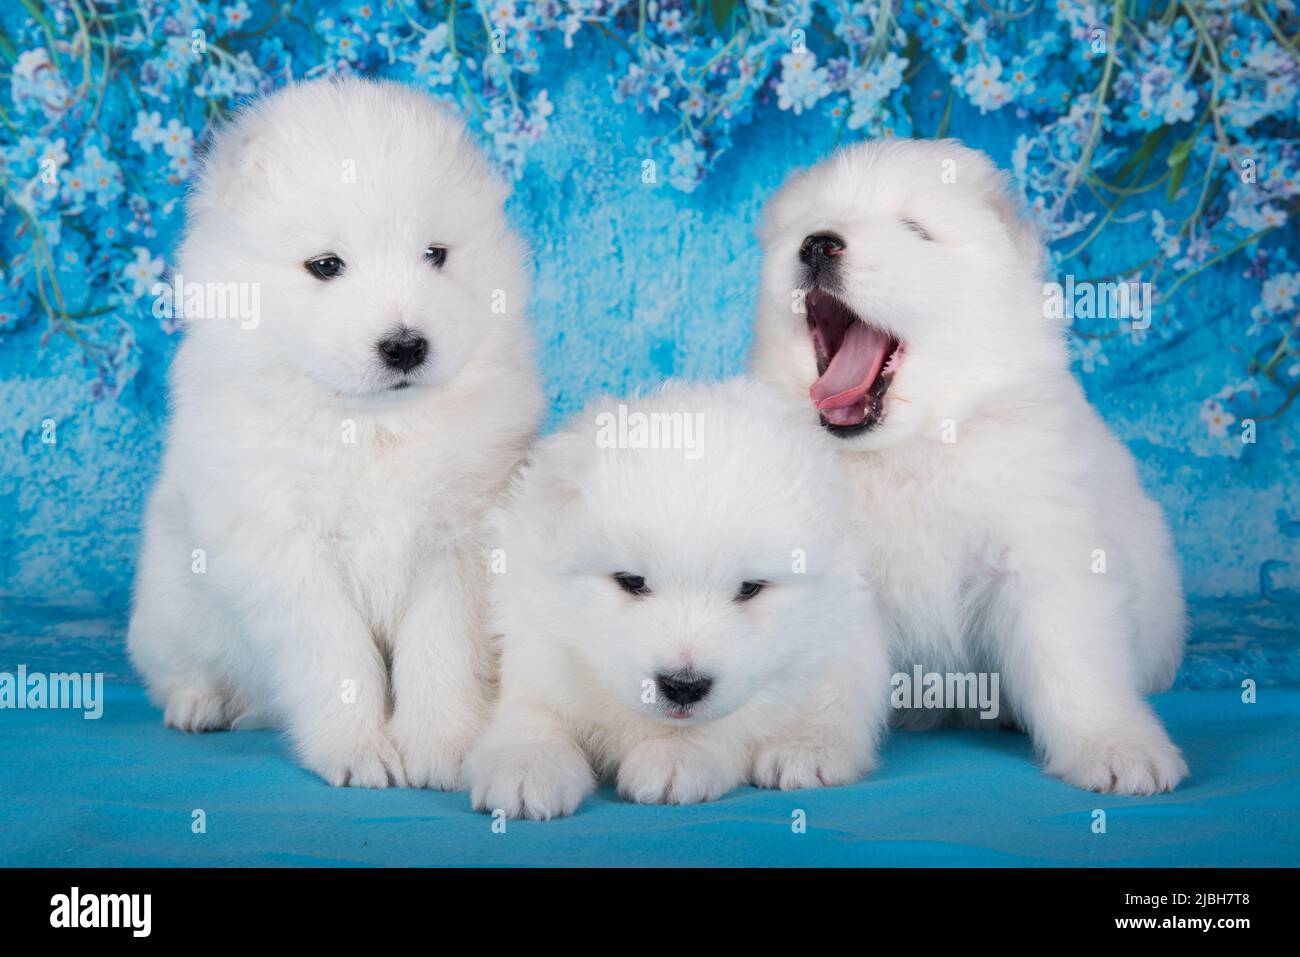 Three White fluffy small Samoyed puppies dogs are sitting on blue background with blue flowers Stock Photo